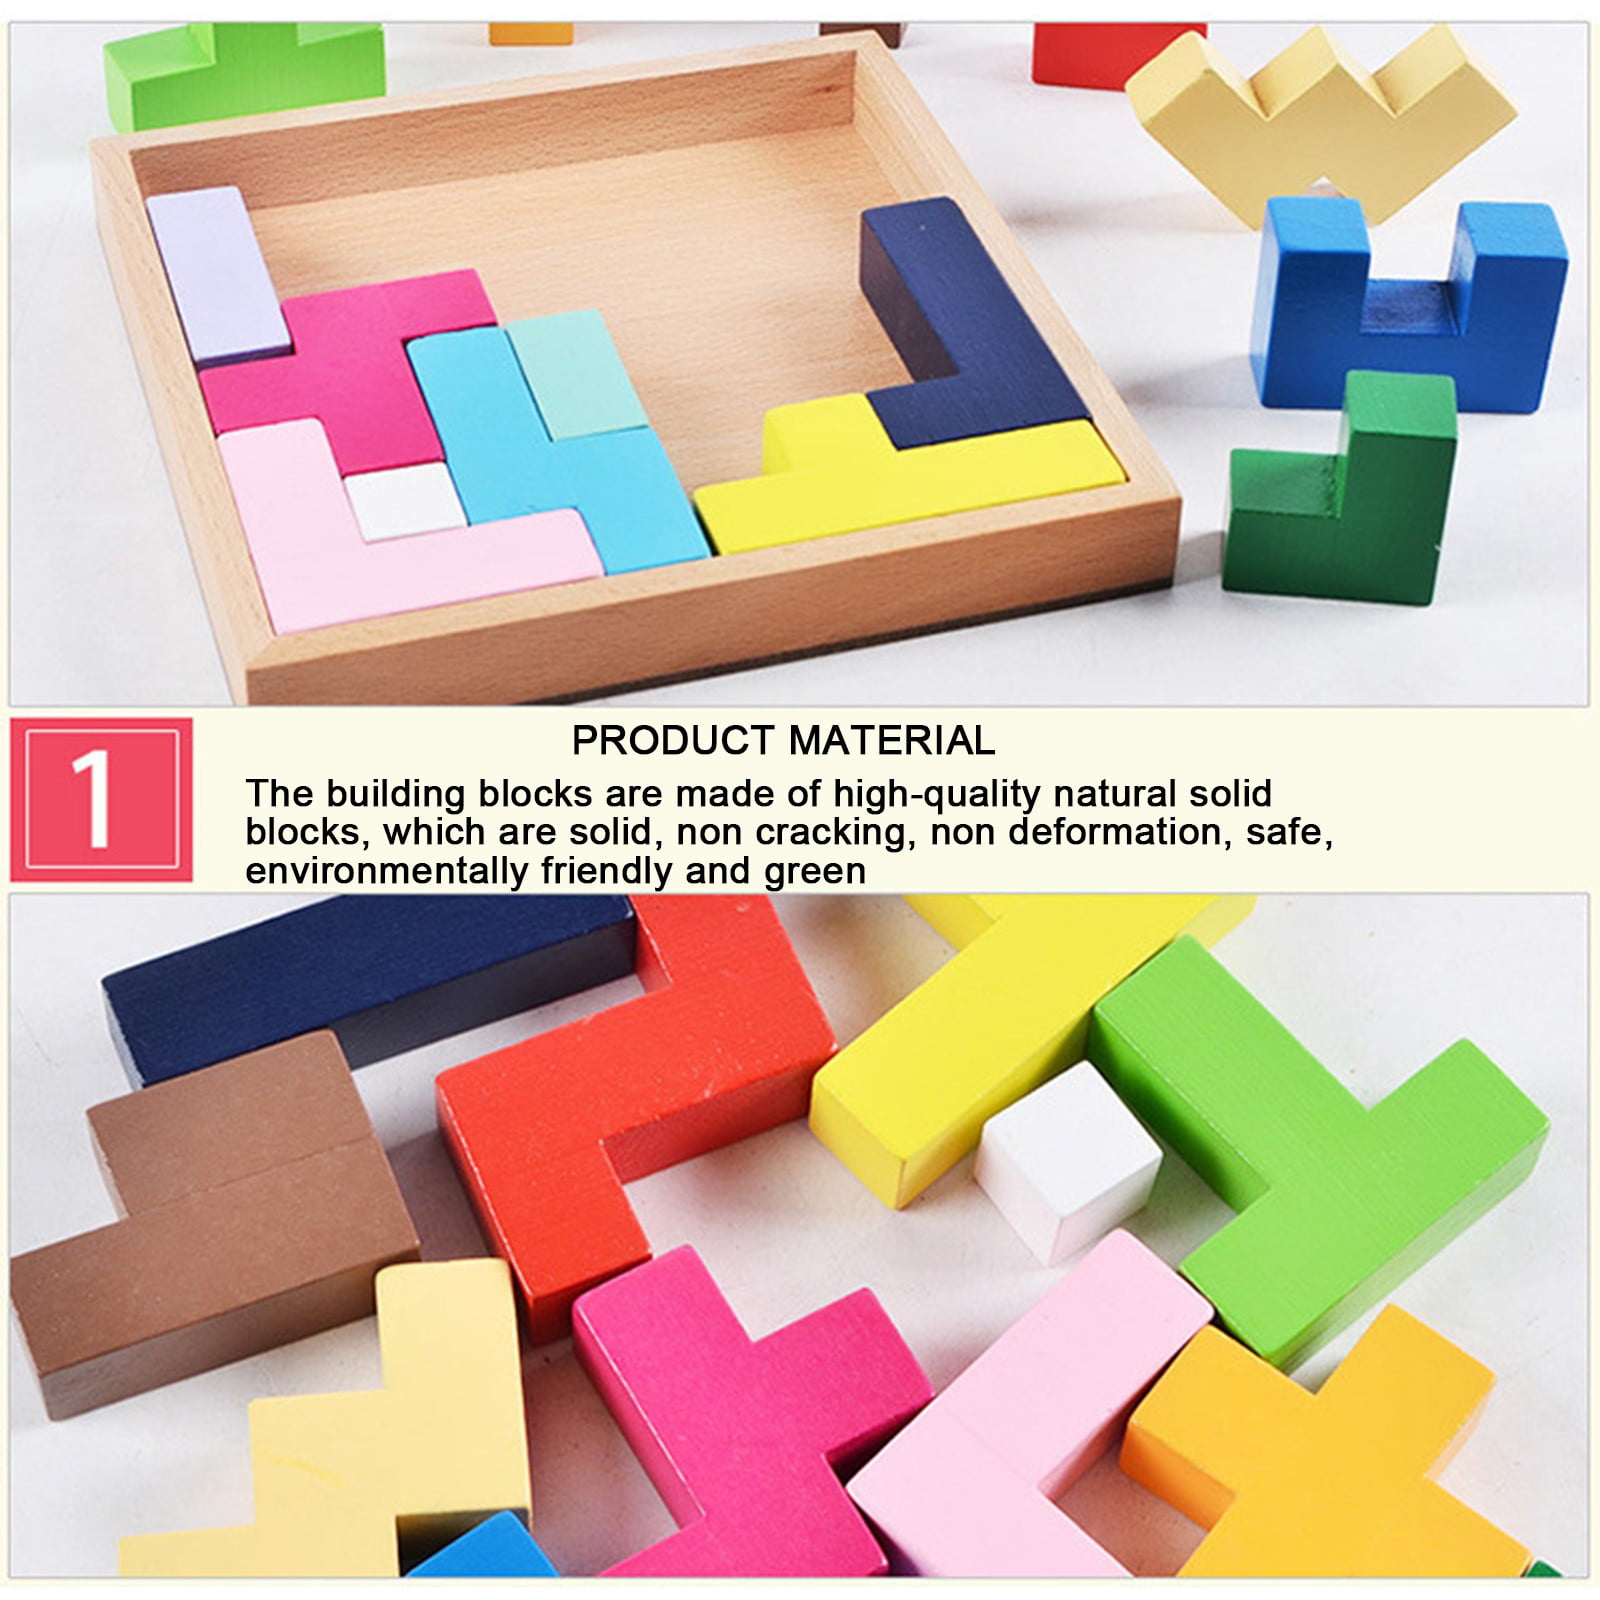 USATDD Wooden Tetris Puzzle Tangram Jigsaw Brain Teasers Toy Building Blocks  Game Colorful Wood Puzzles Box Educational Gift For Kids 40 Pcs 